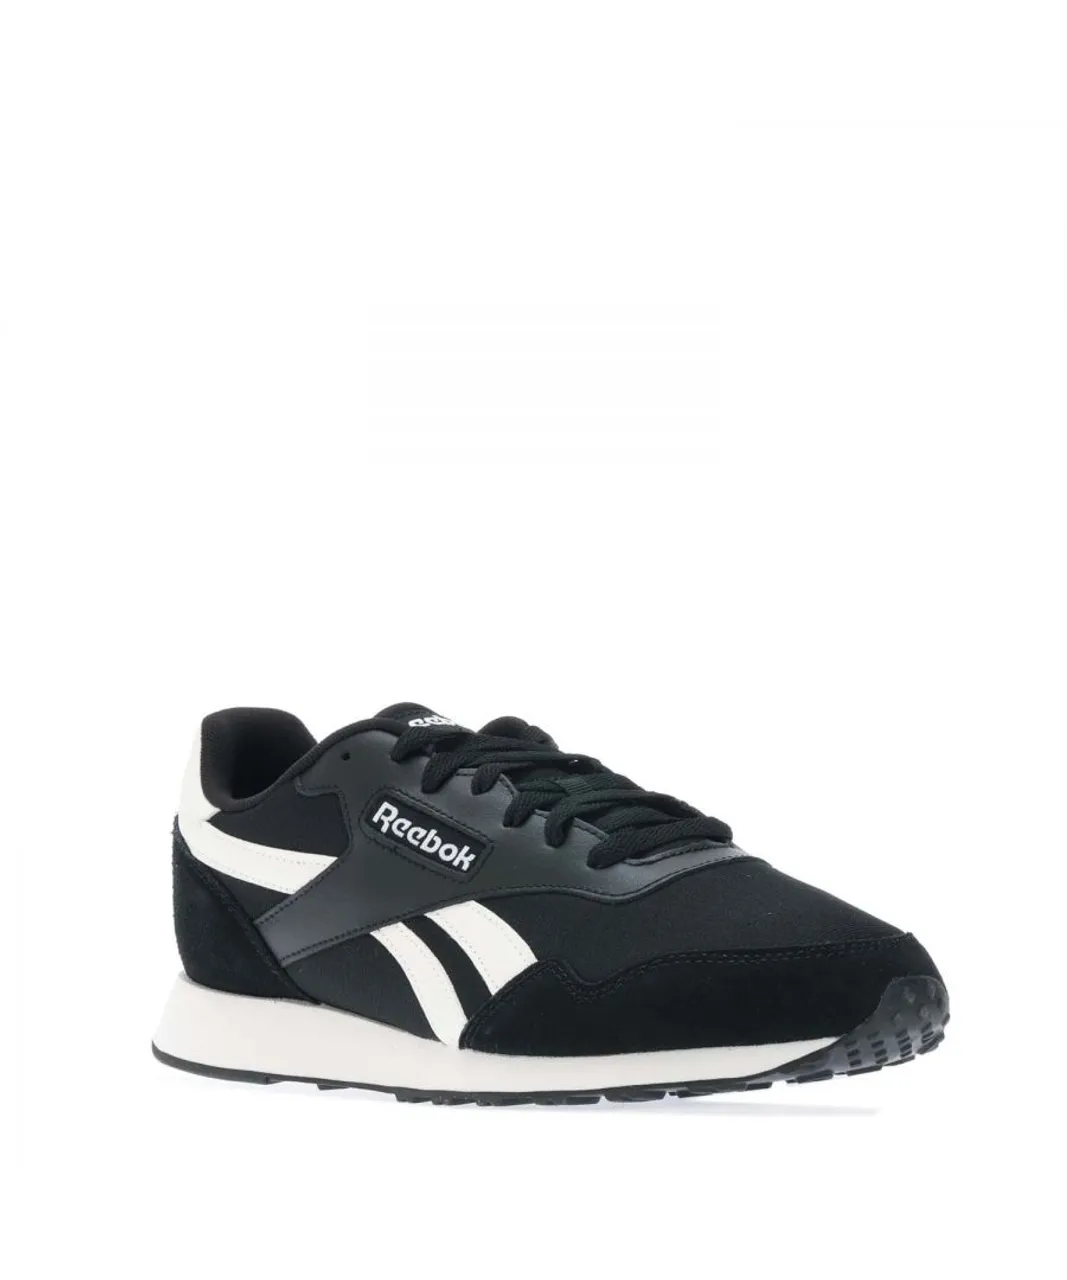 Reebok Mens Royal Ultra Trainers in Black Leather (archived)